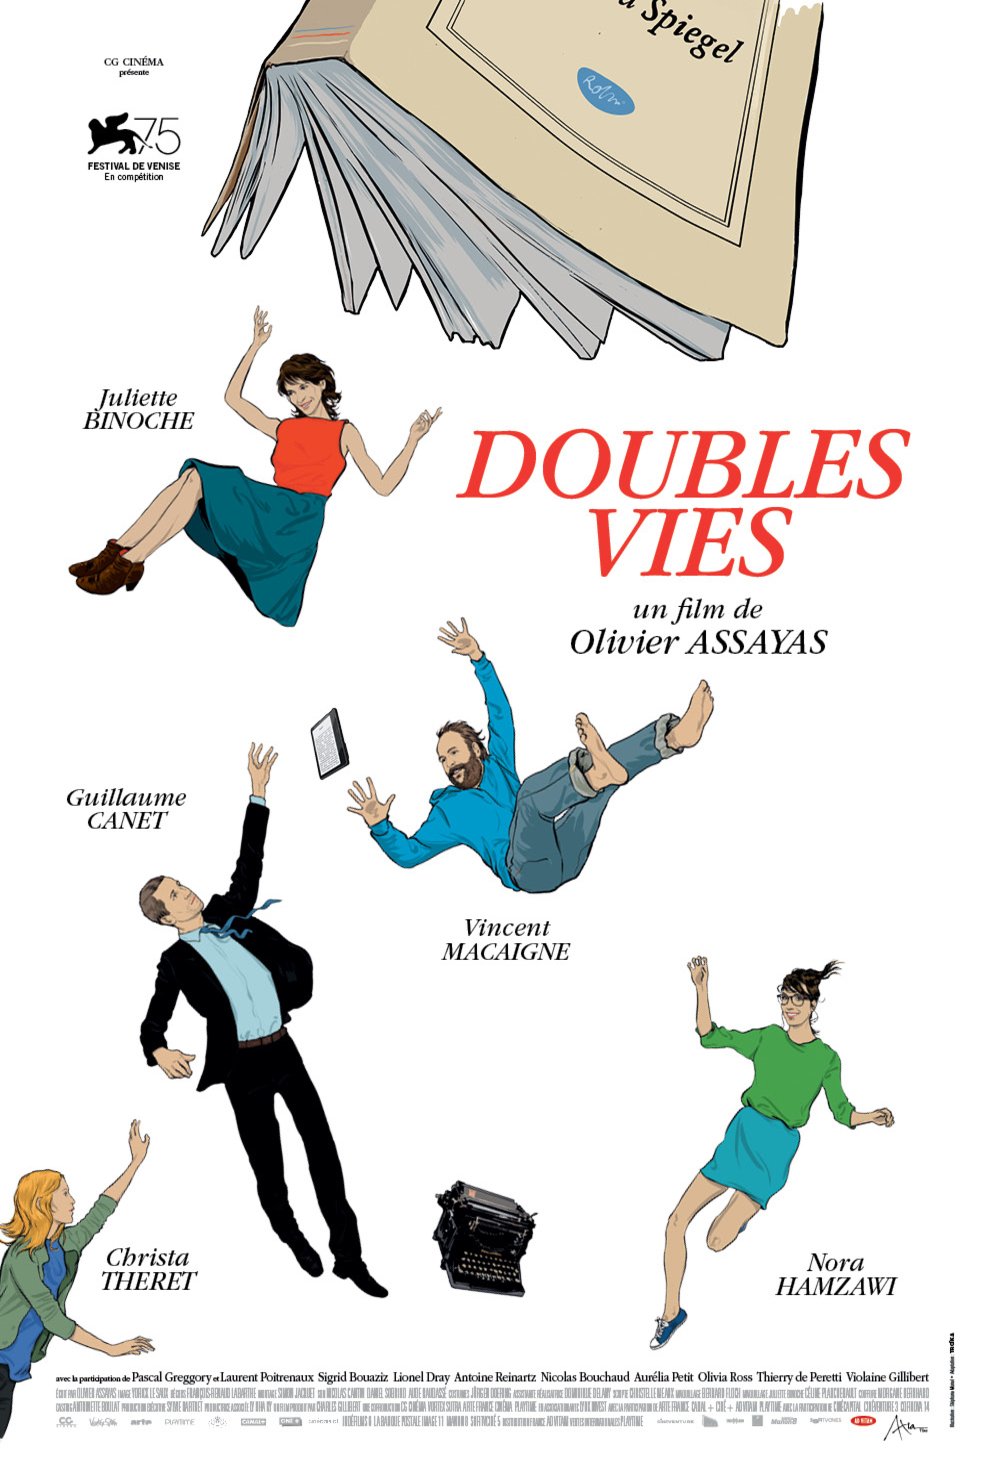 Poster of the movie Doubles vies